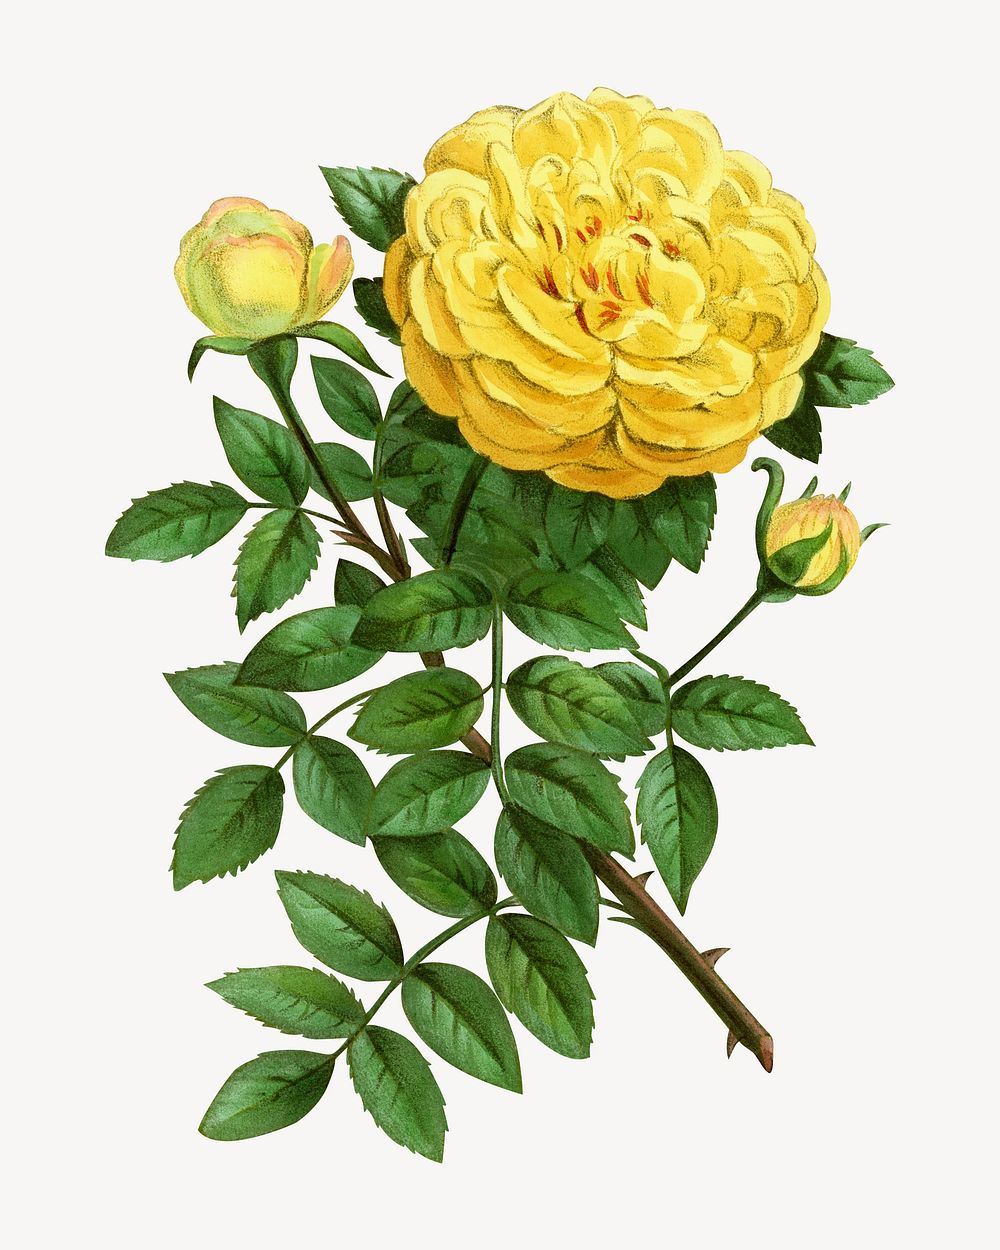 Yellow rose, French flower vintage illustration by François-Frédéric Grobon. Remixed by rawpixel.